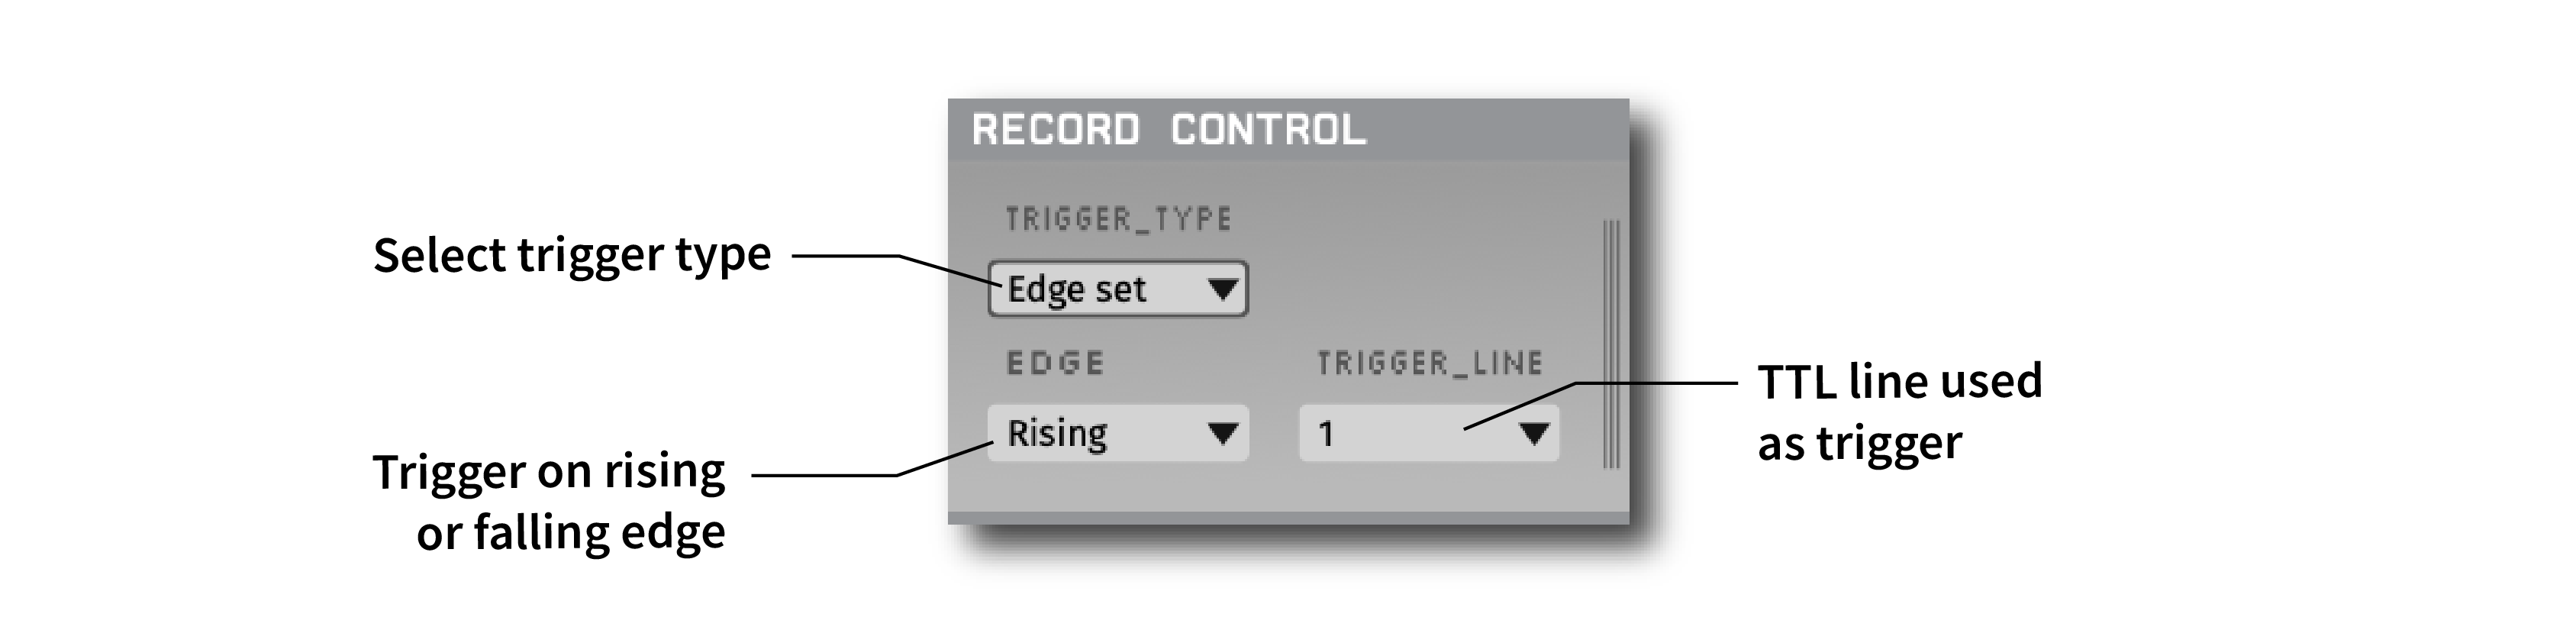 Annotated Record Control editor